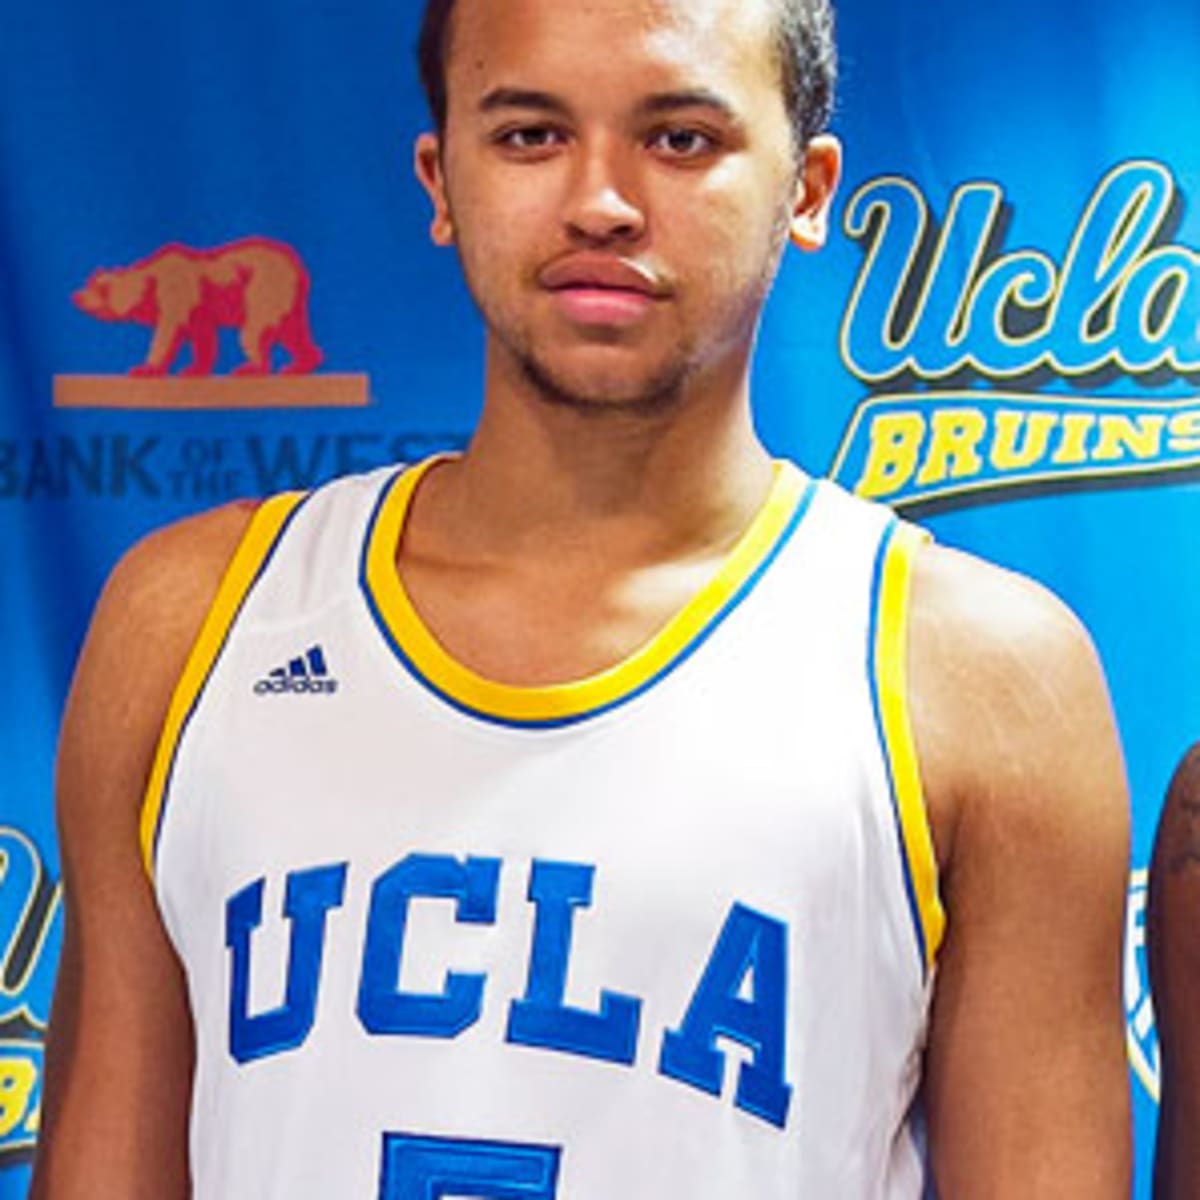 Who's That Guy? UCLA's Kyle Anderson!